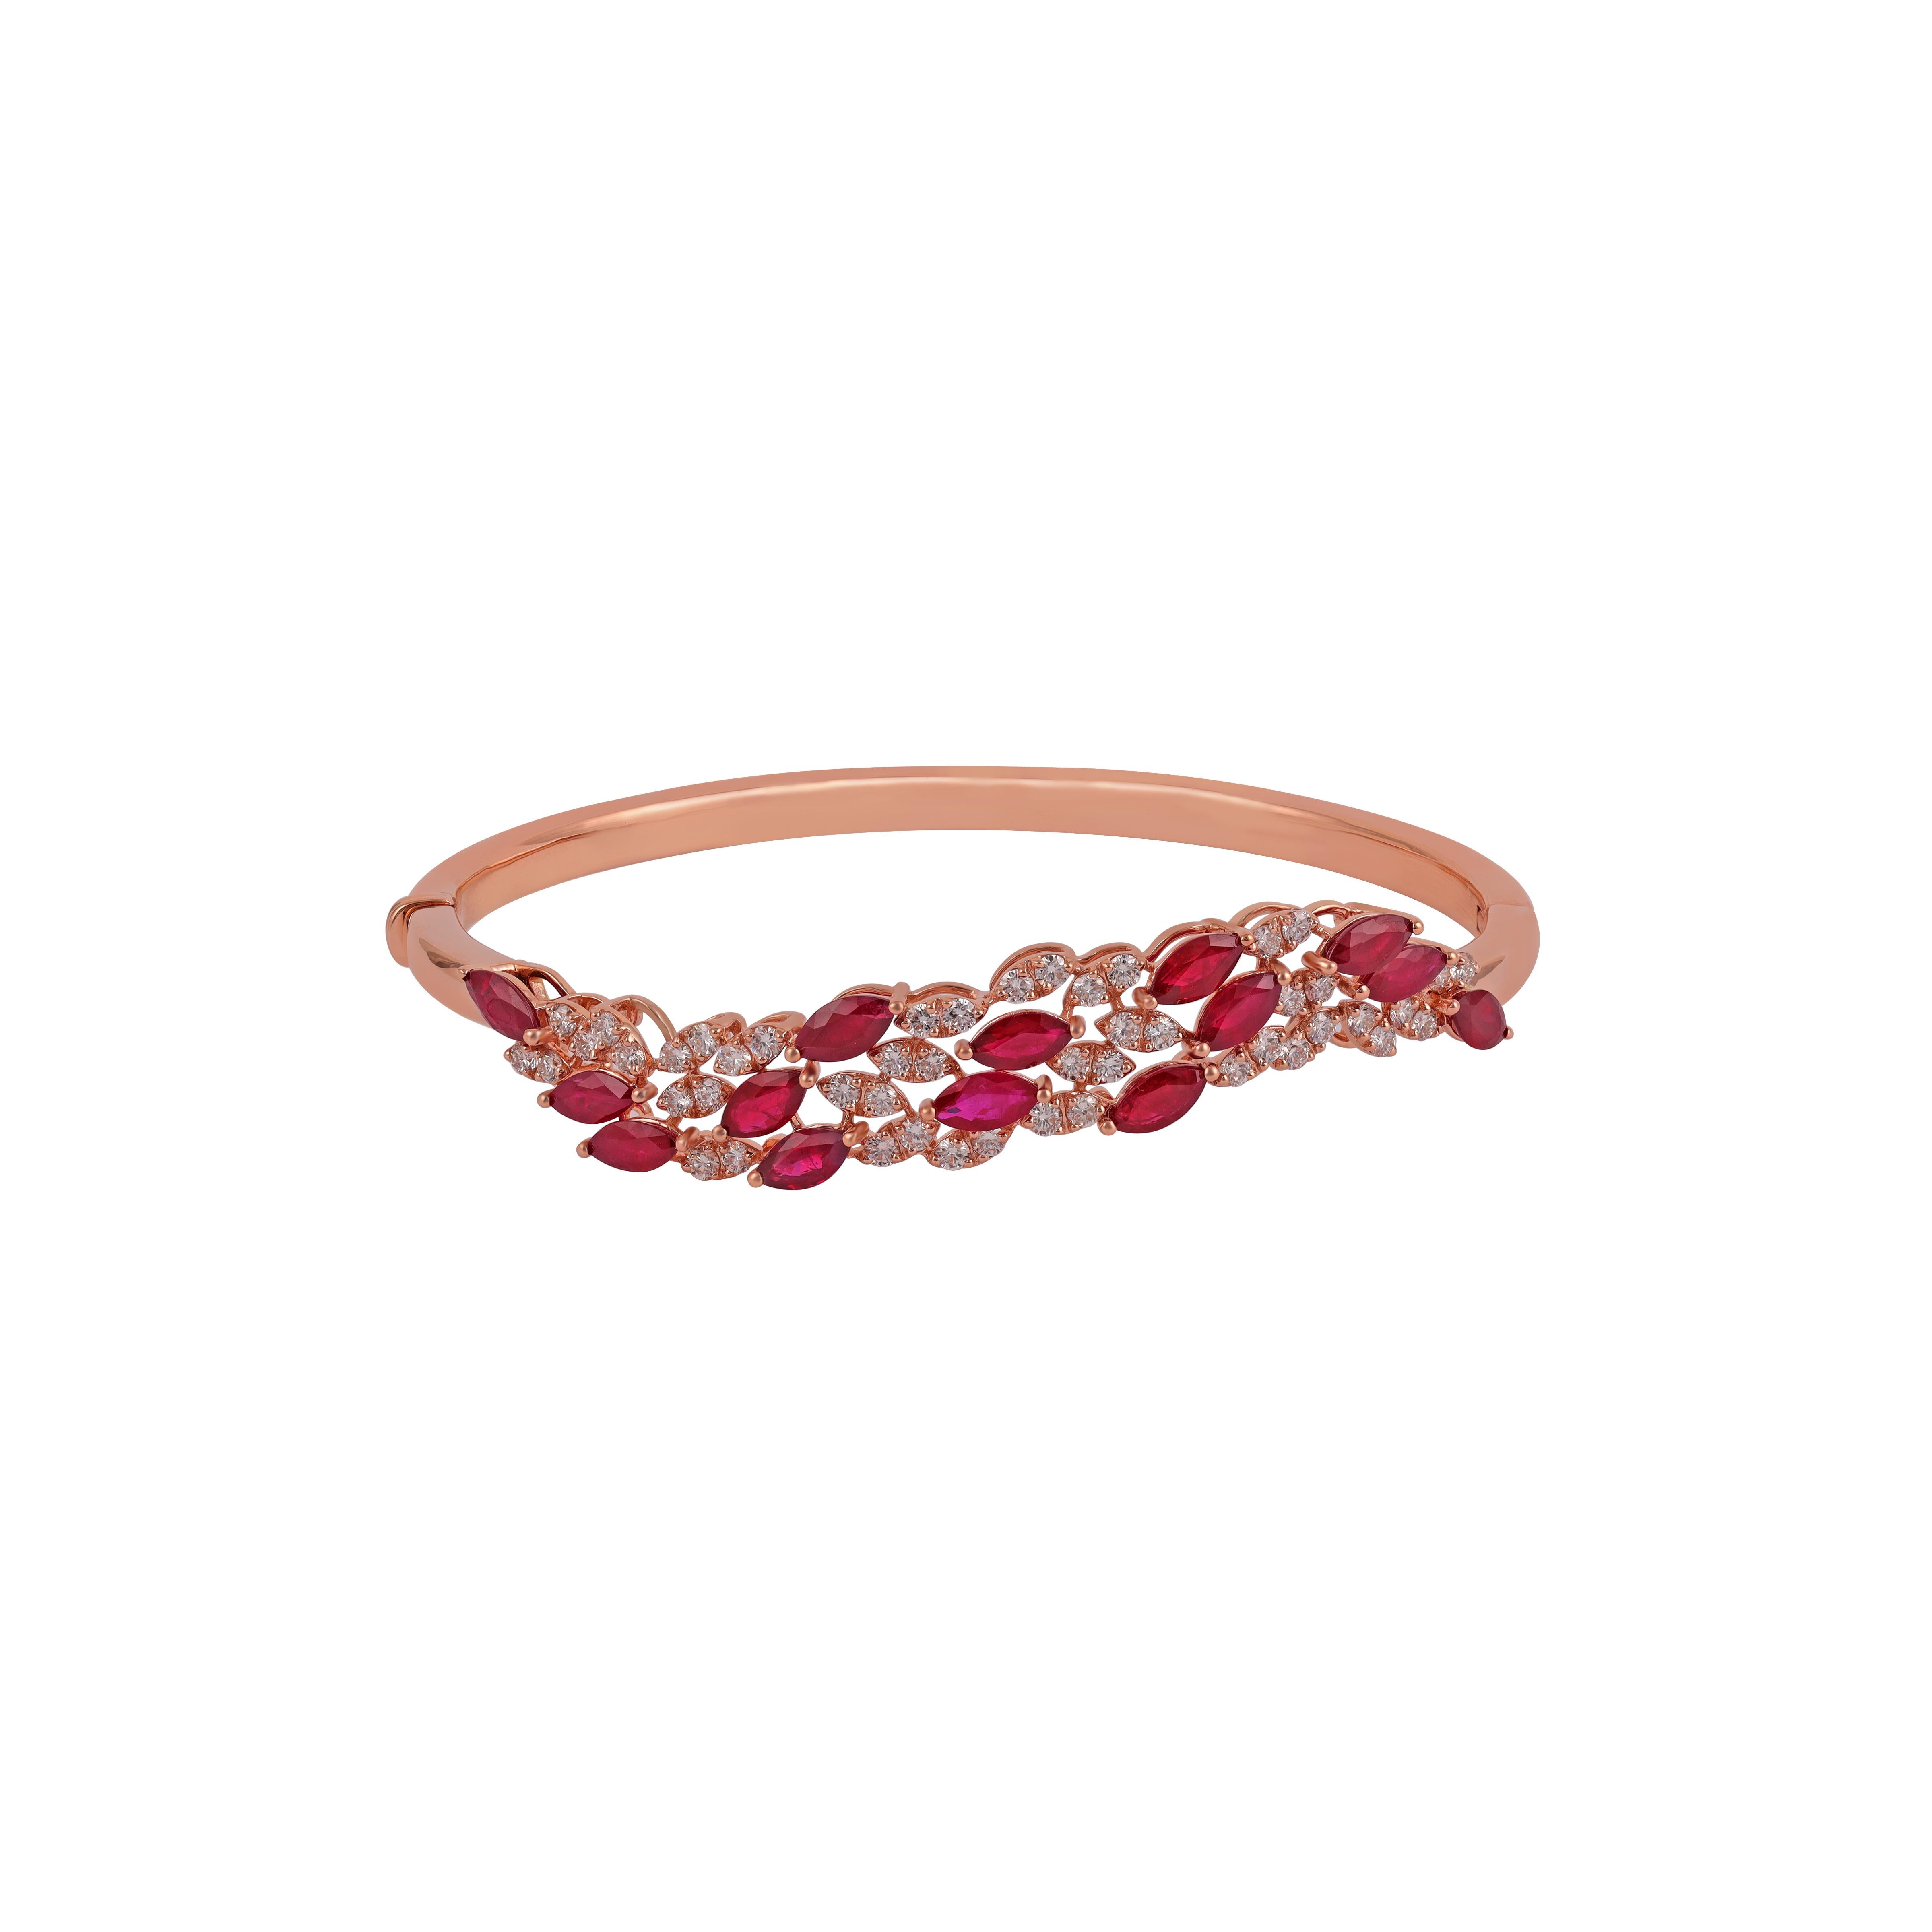 4.29  Carat Natural Burma Ruby Bangle with Diamonds in 18k Rose Gold

Ruby 4.29 carats with  Diamond 1.26, Bangle set in 18 Karat Gold Settings
Gold - 15.31 Gm.

Size 7 Inch's

The width and size of the bracelet can be changed.
This piece can be